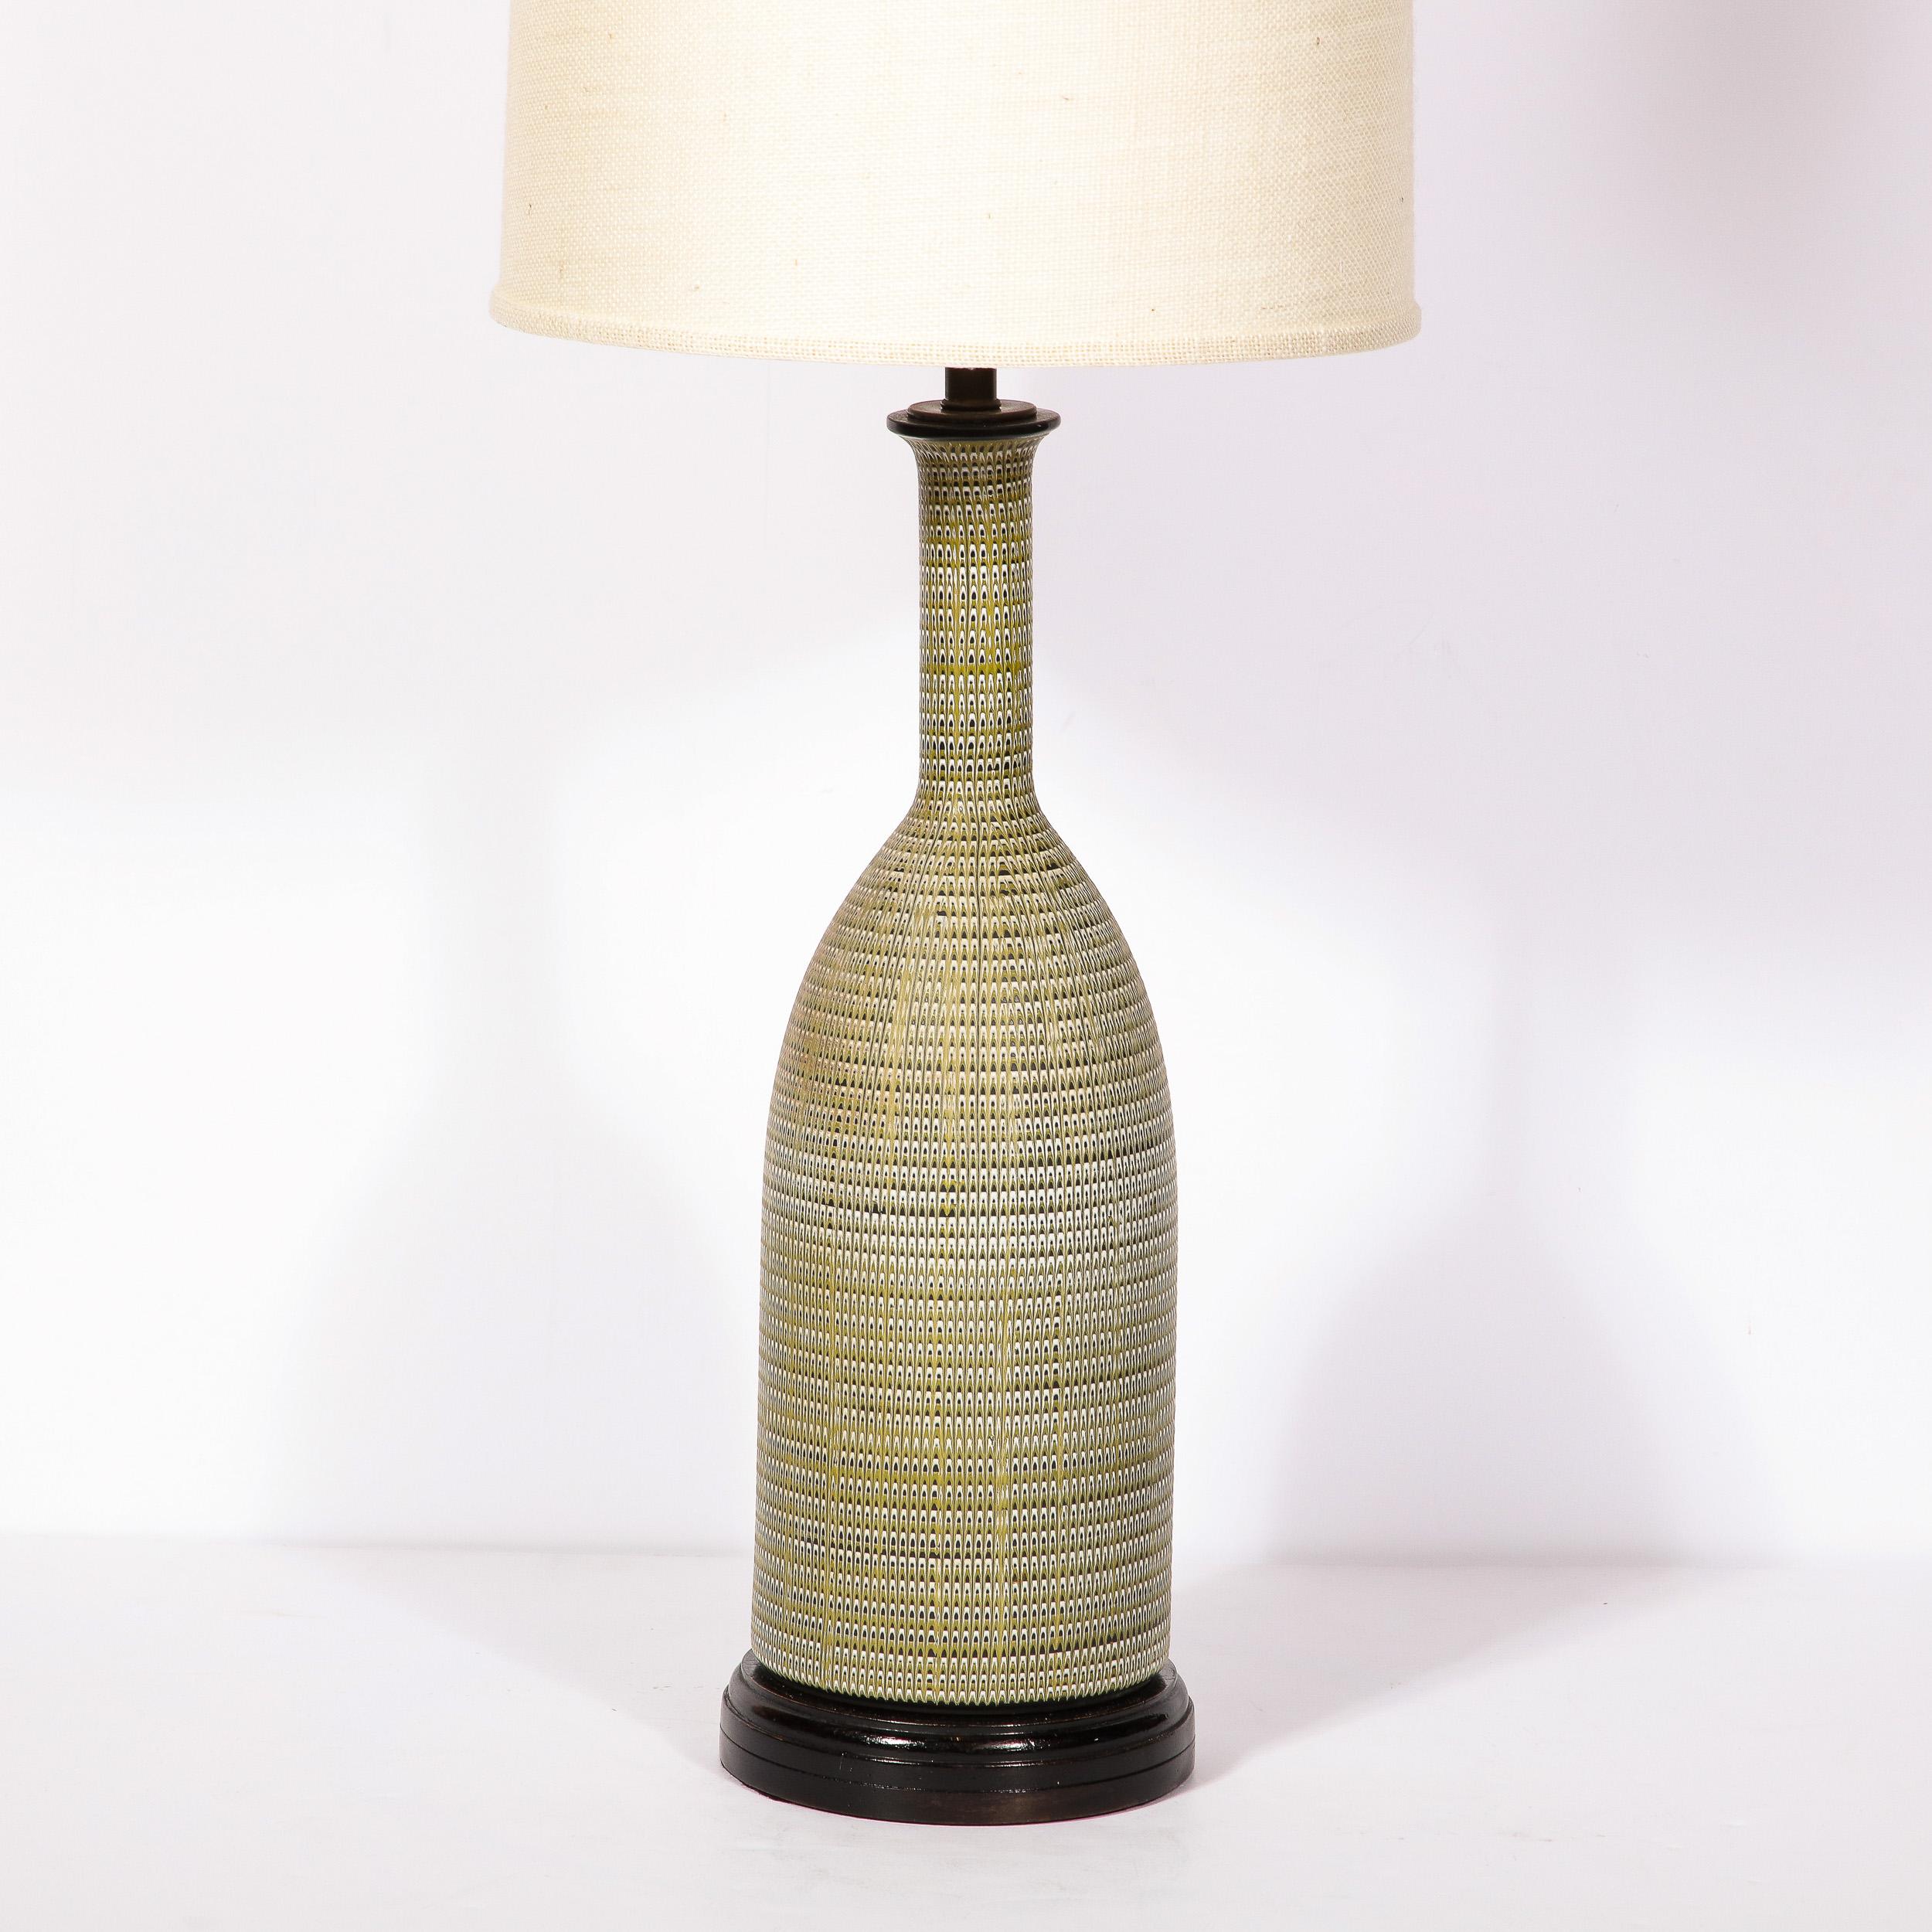 American Pair of Mid-Century Modern Olive Green Glazed Ceramic Table Lamps